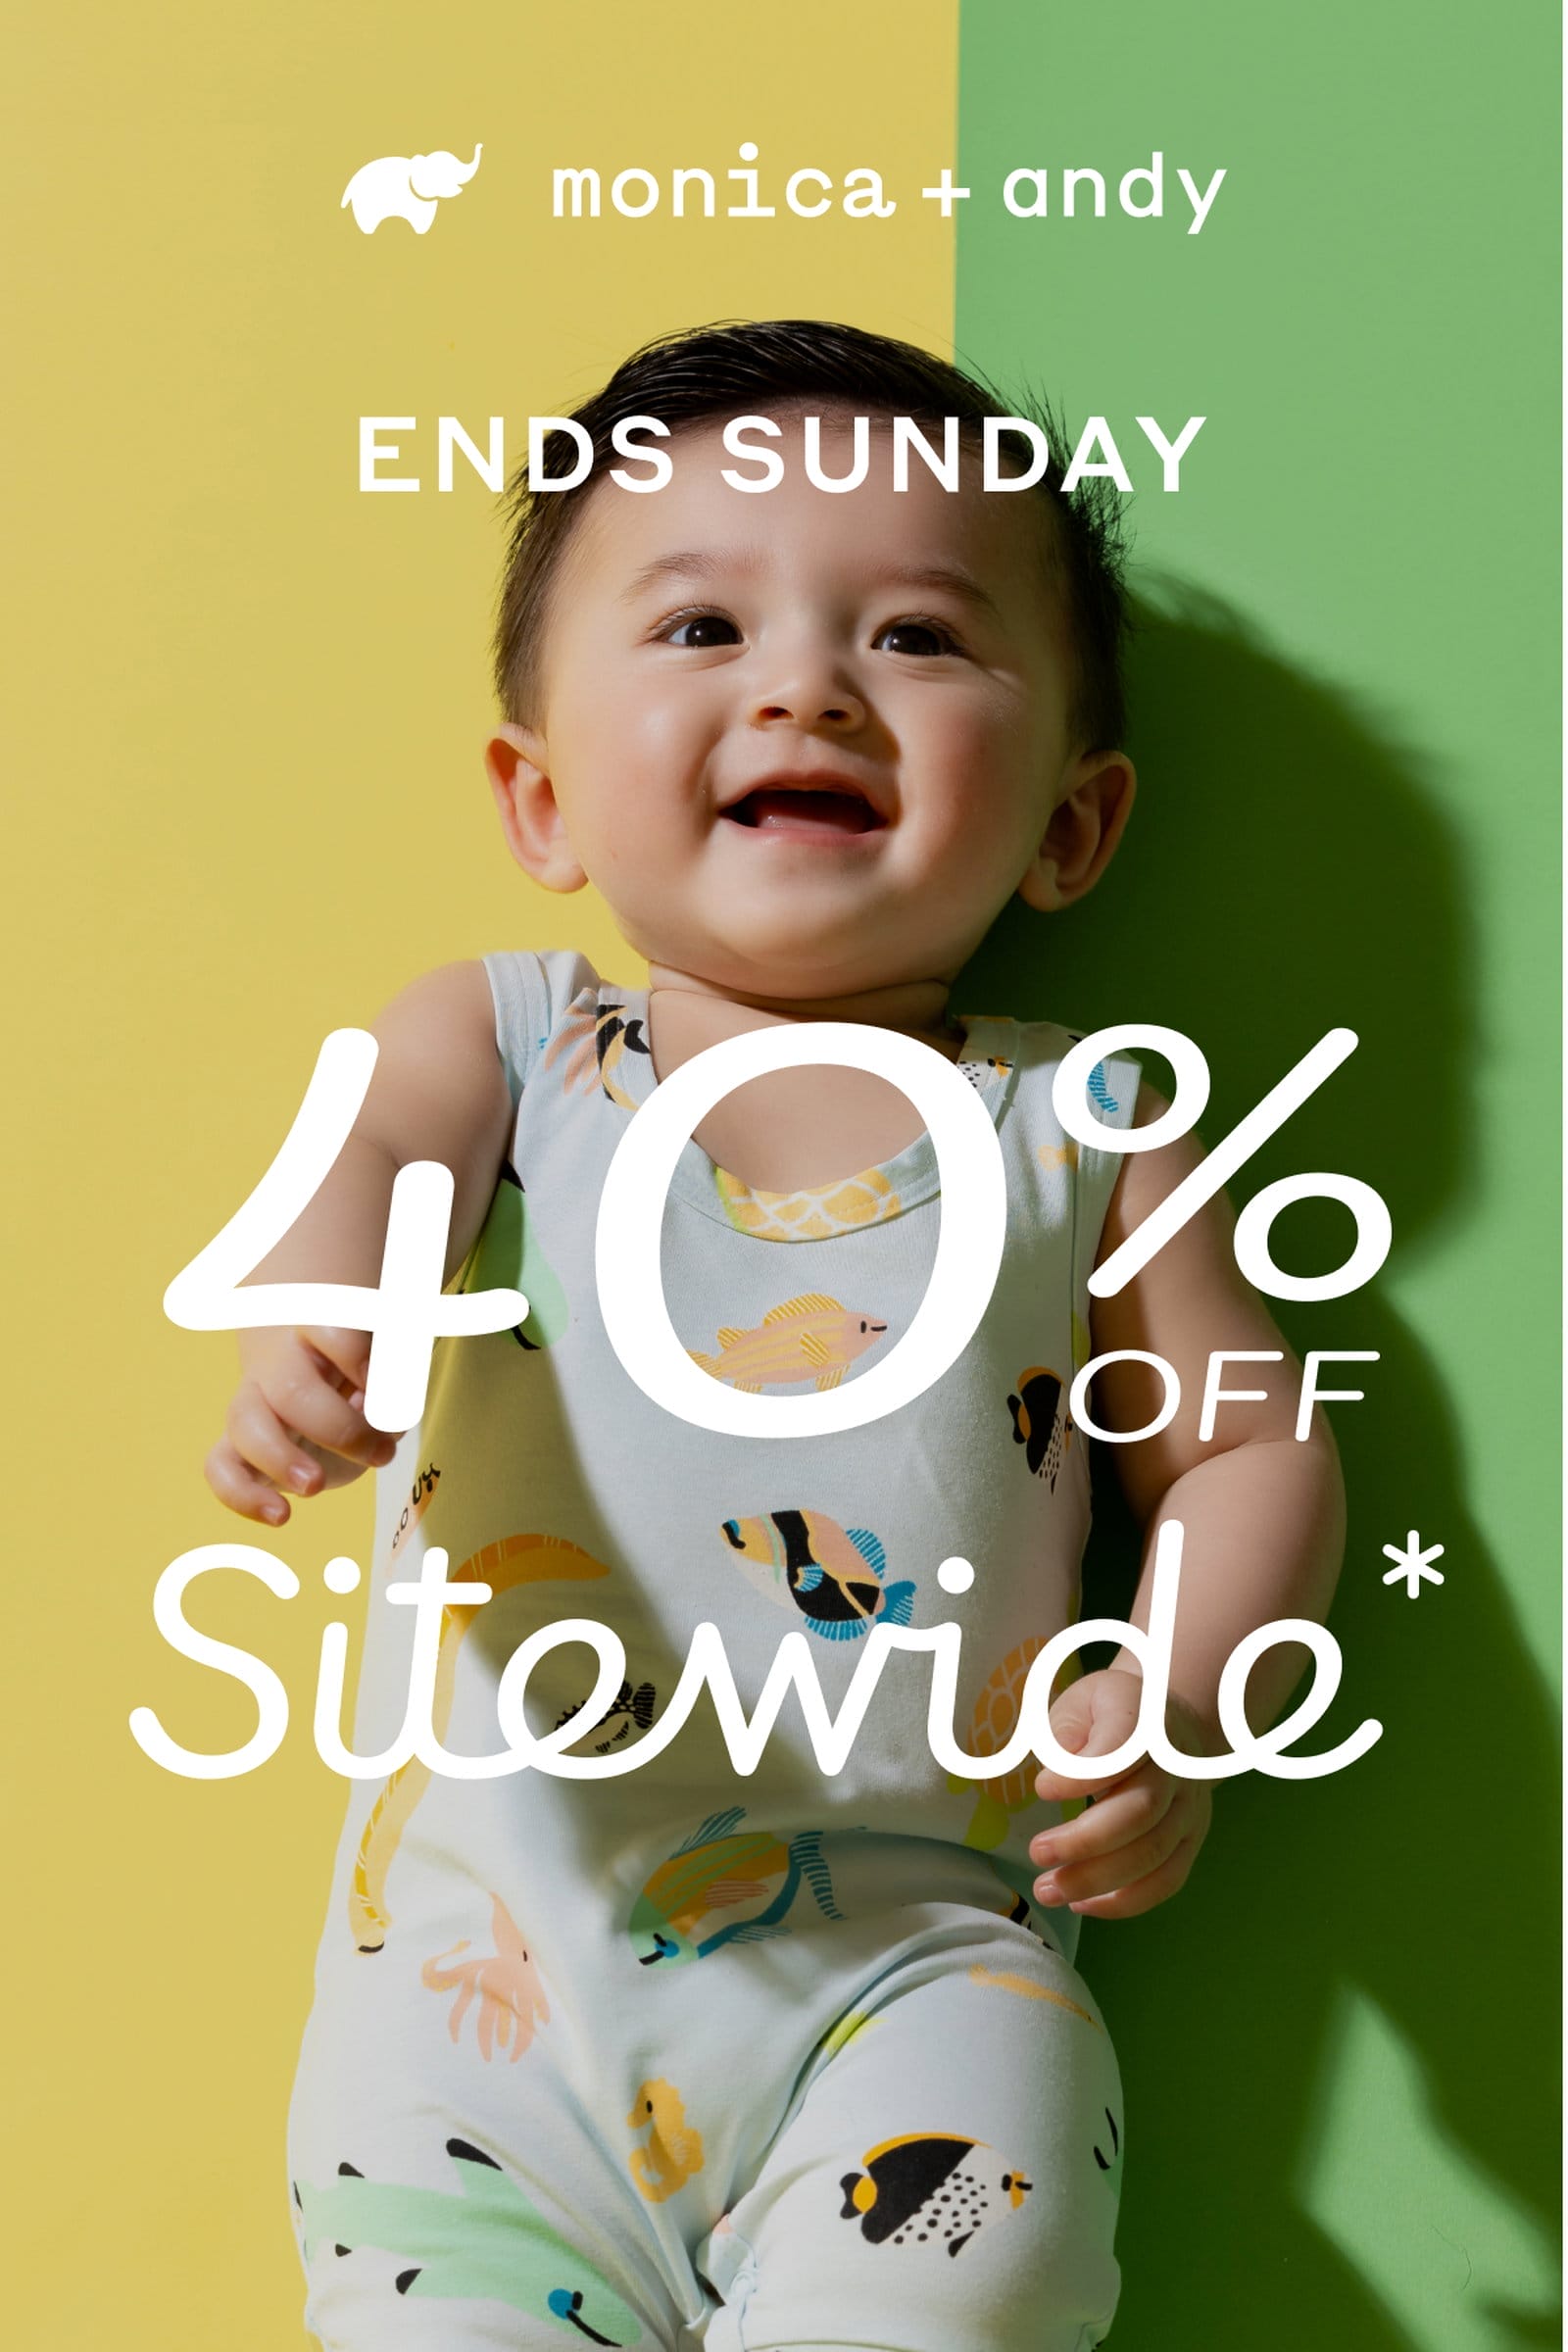 Monica + Andy: 40% Off Sitewide